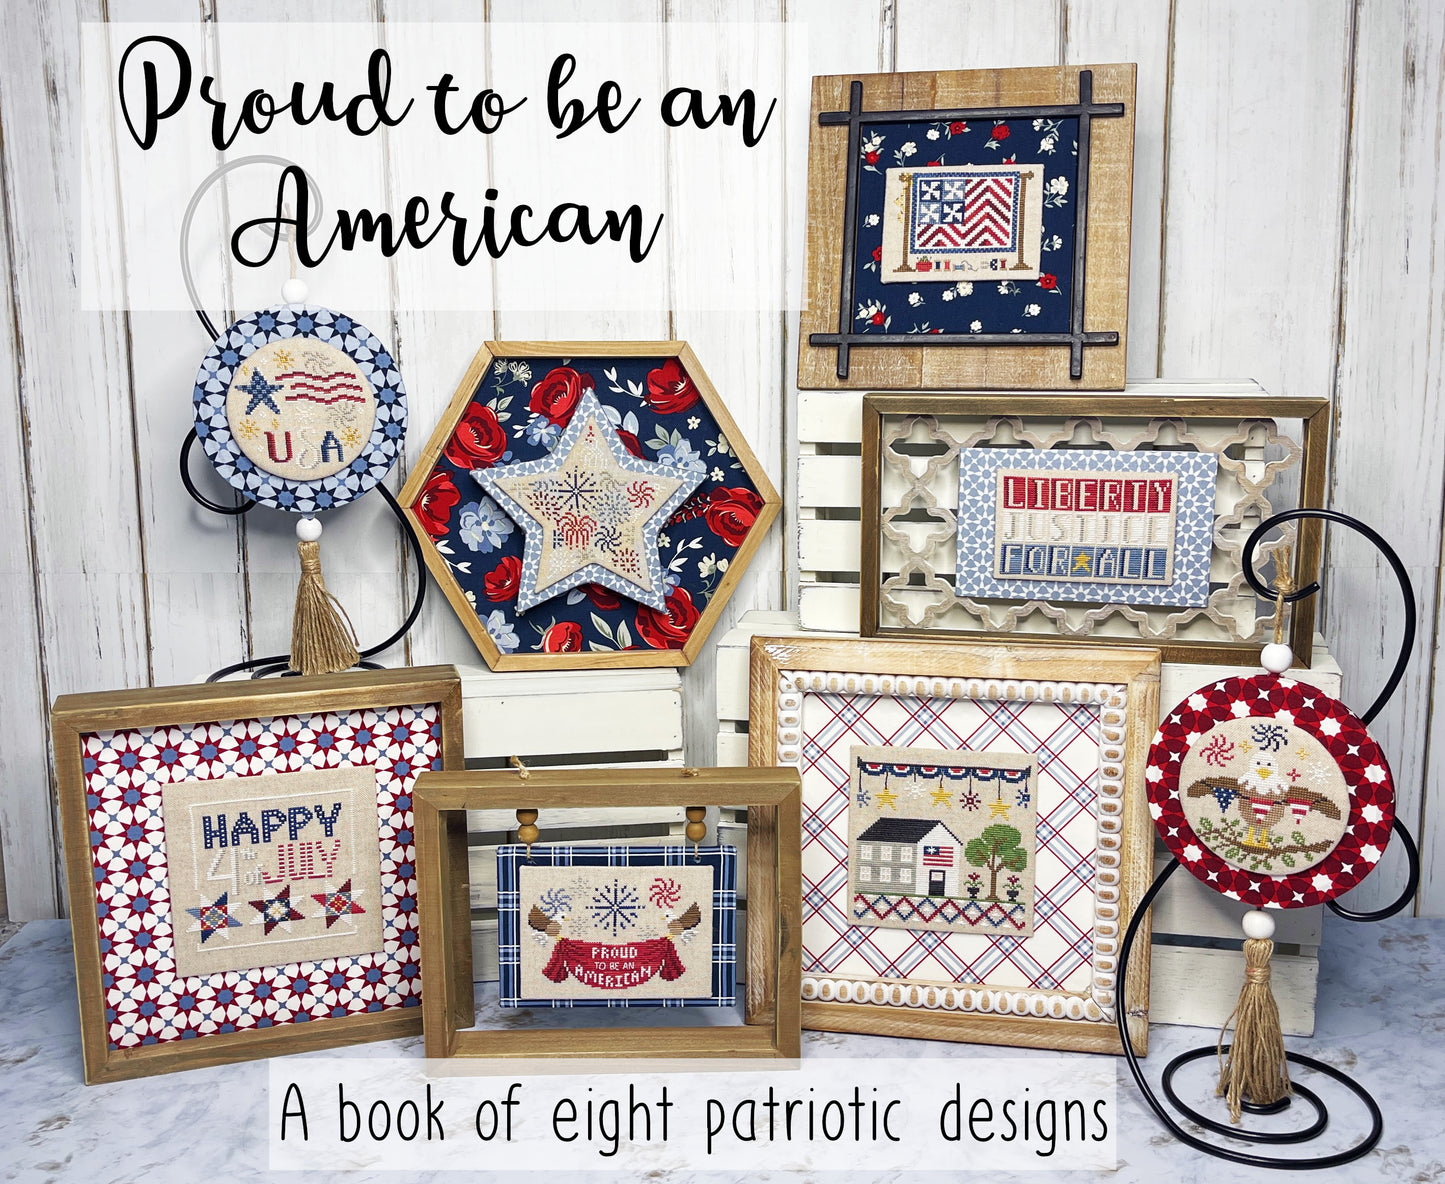 Proud to be an American Booklet by Little Stitch Girl